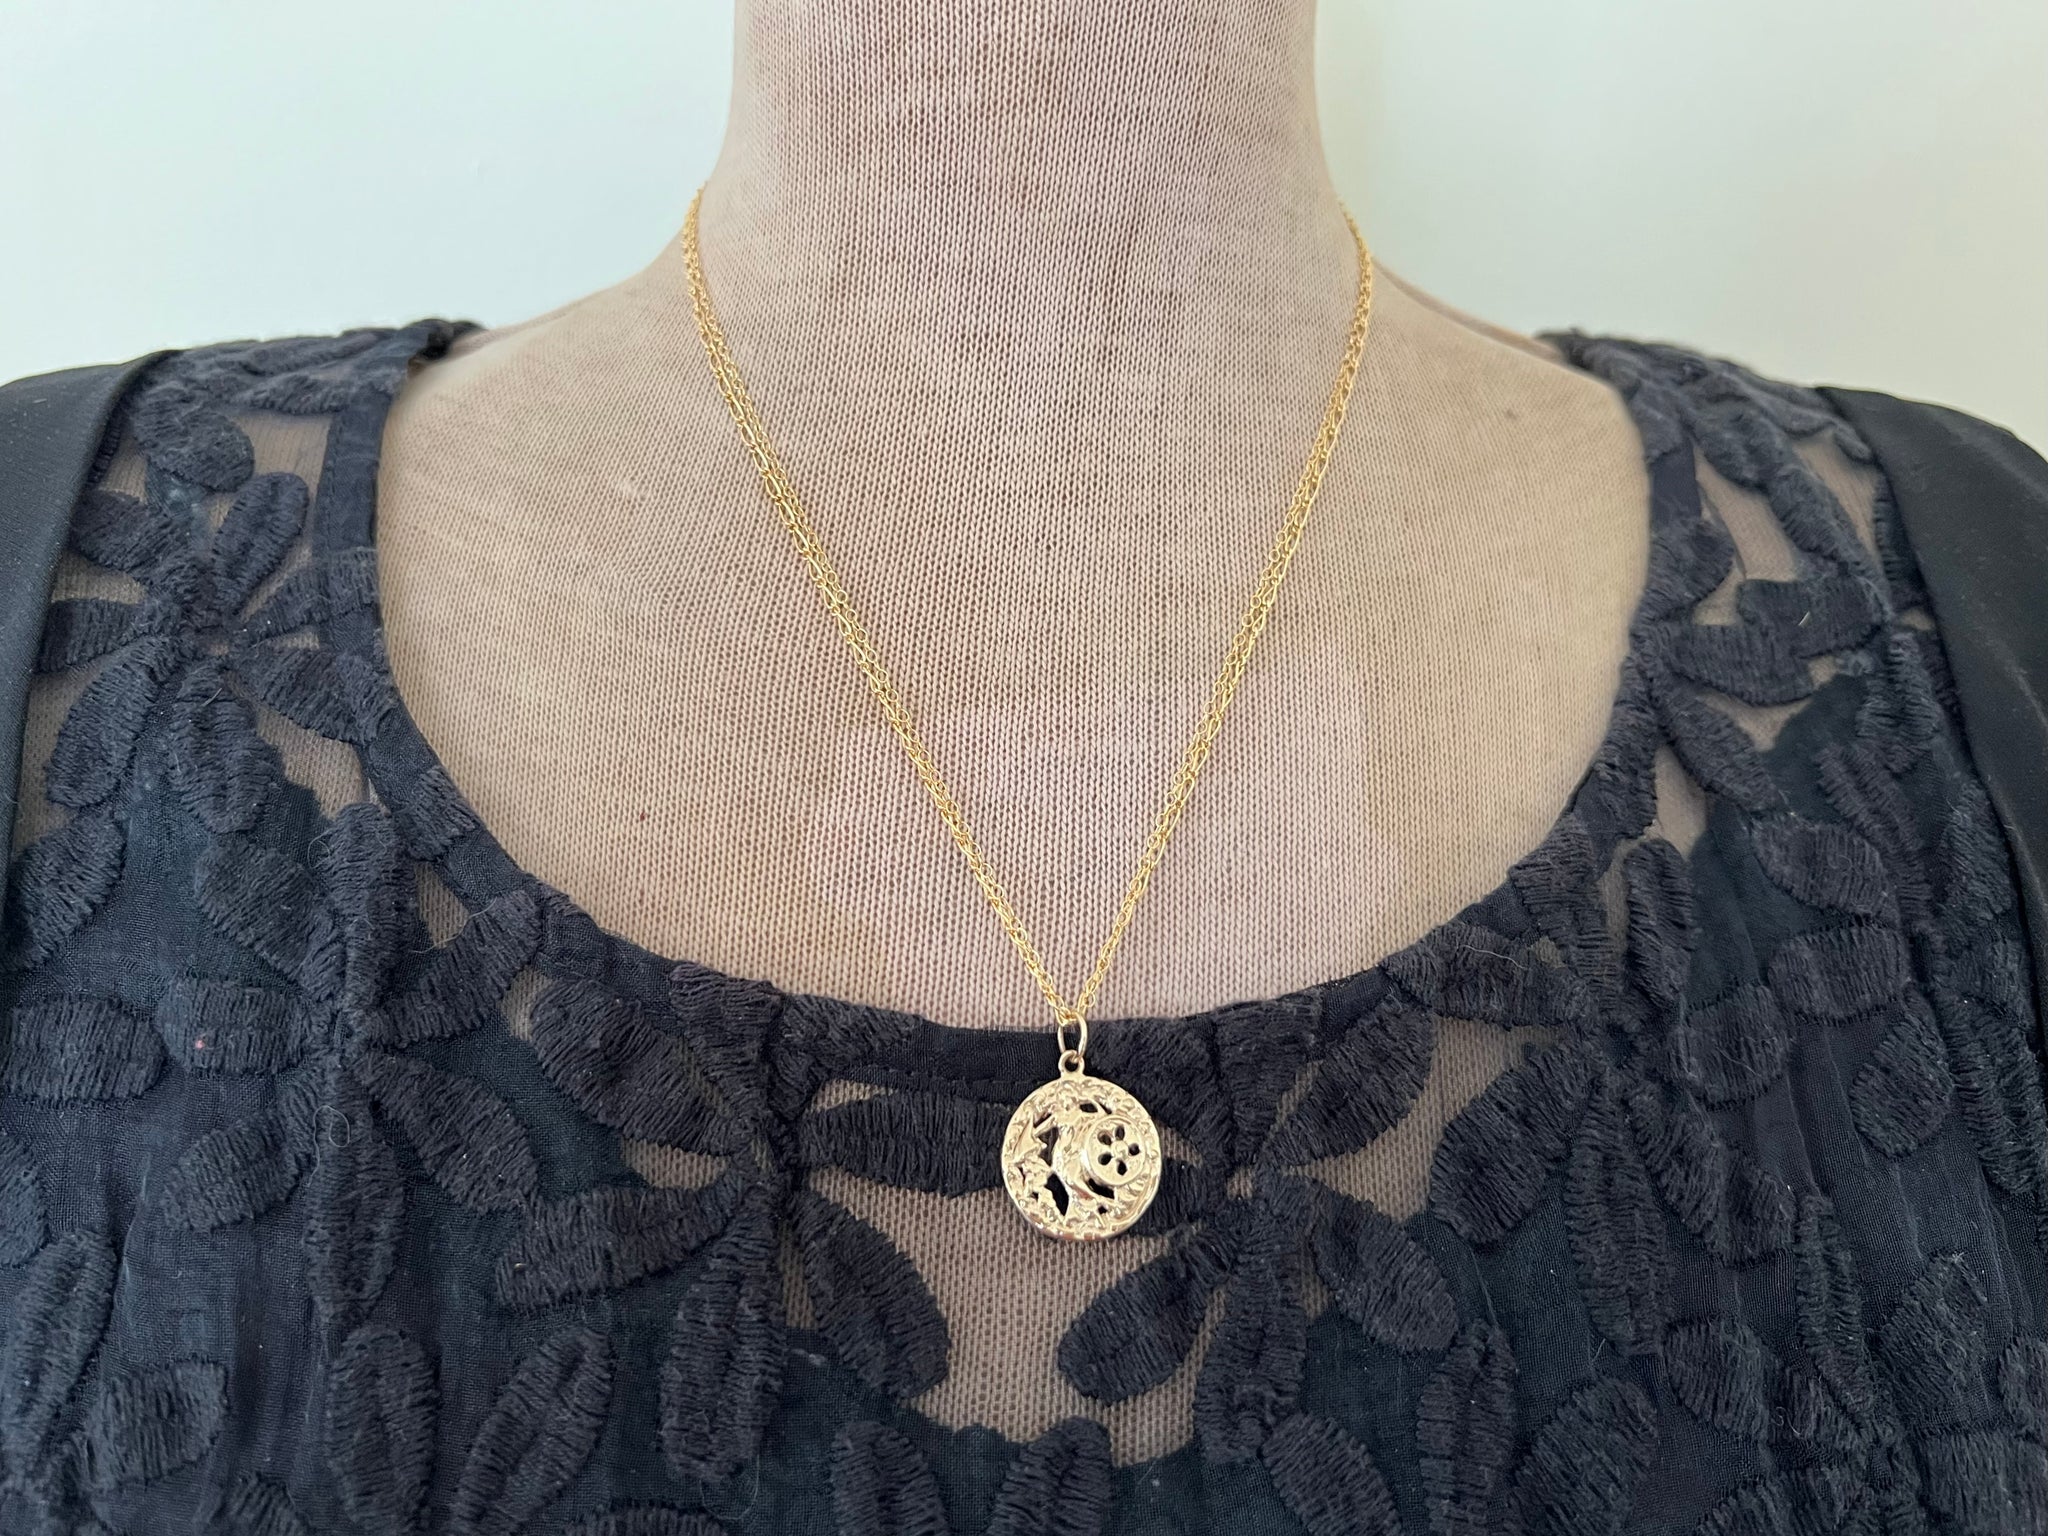 Chain Necklace 18"(46cm) 14K Gold Filled / チェーン ネックレス 18"(46cm) 14Kゴールドフィルド